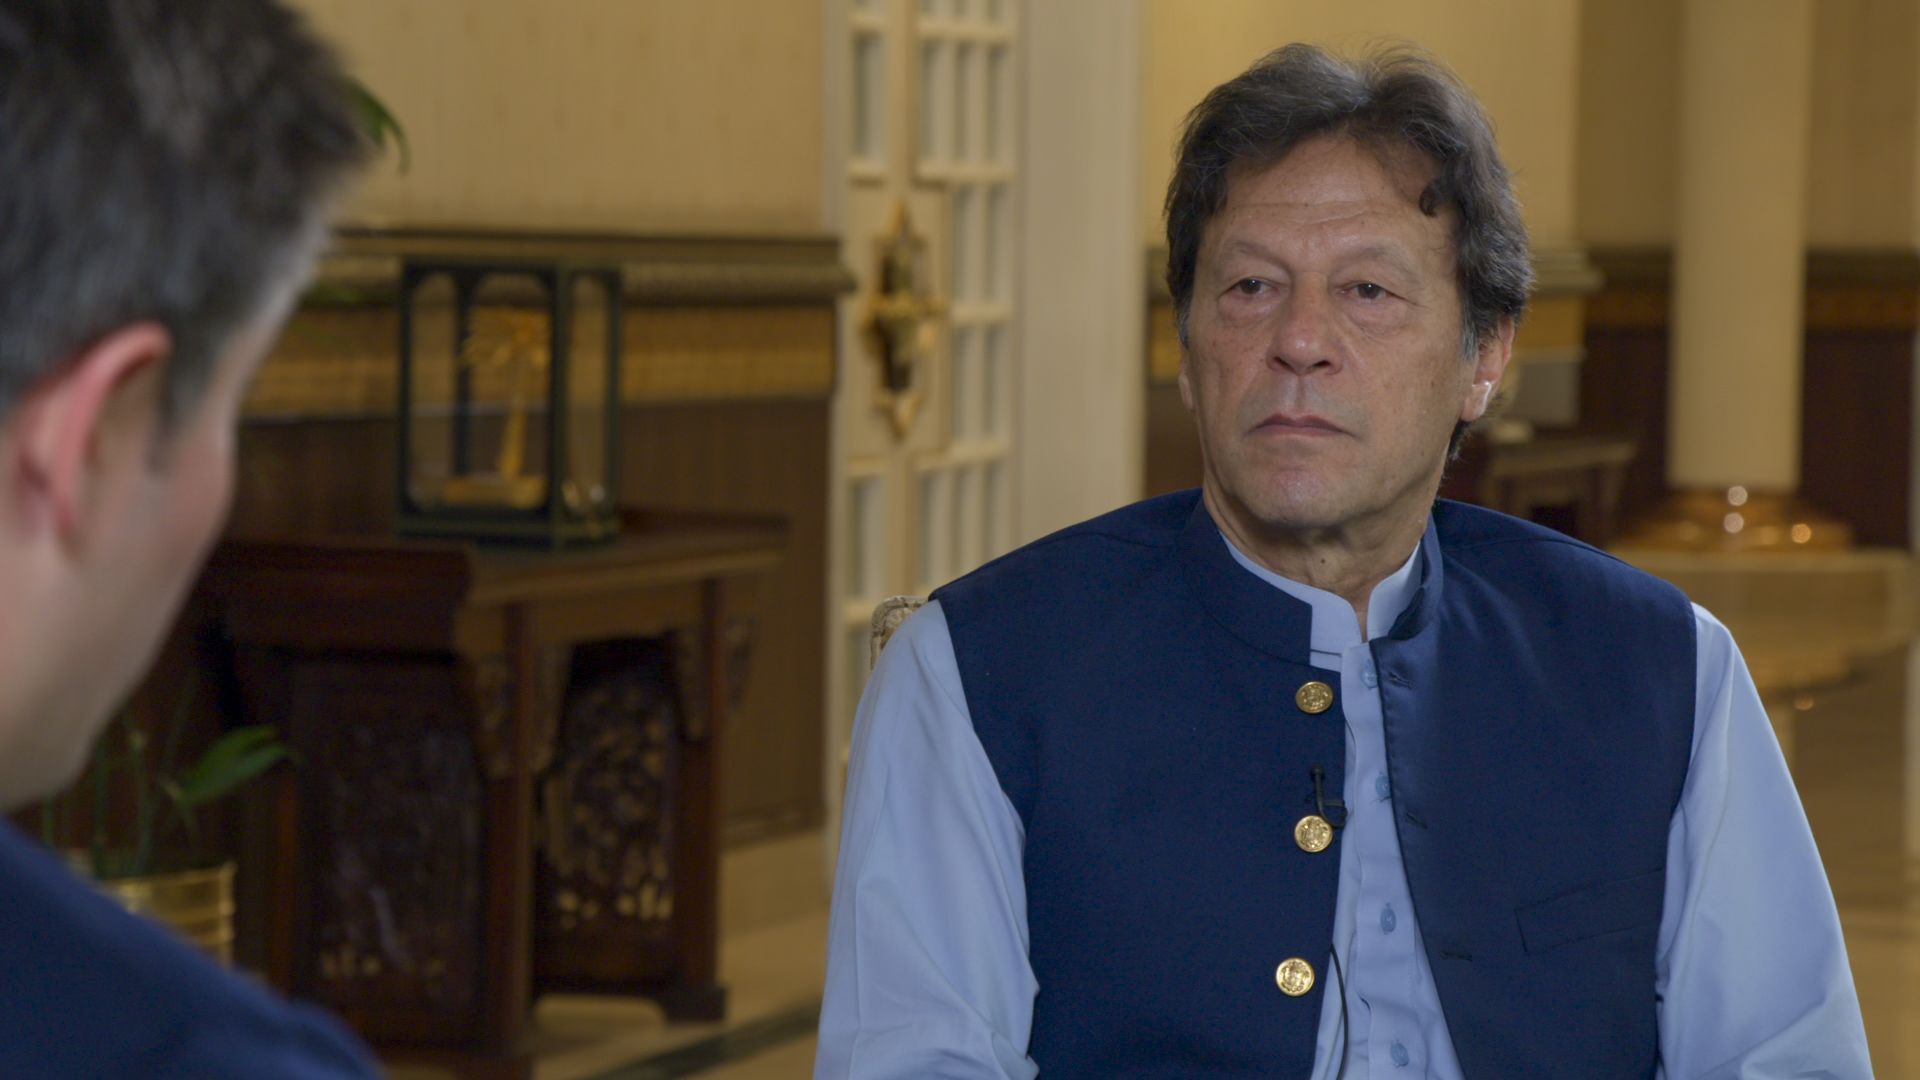 Pakistan Prime Minister Imran Khan is seen during an interview for 